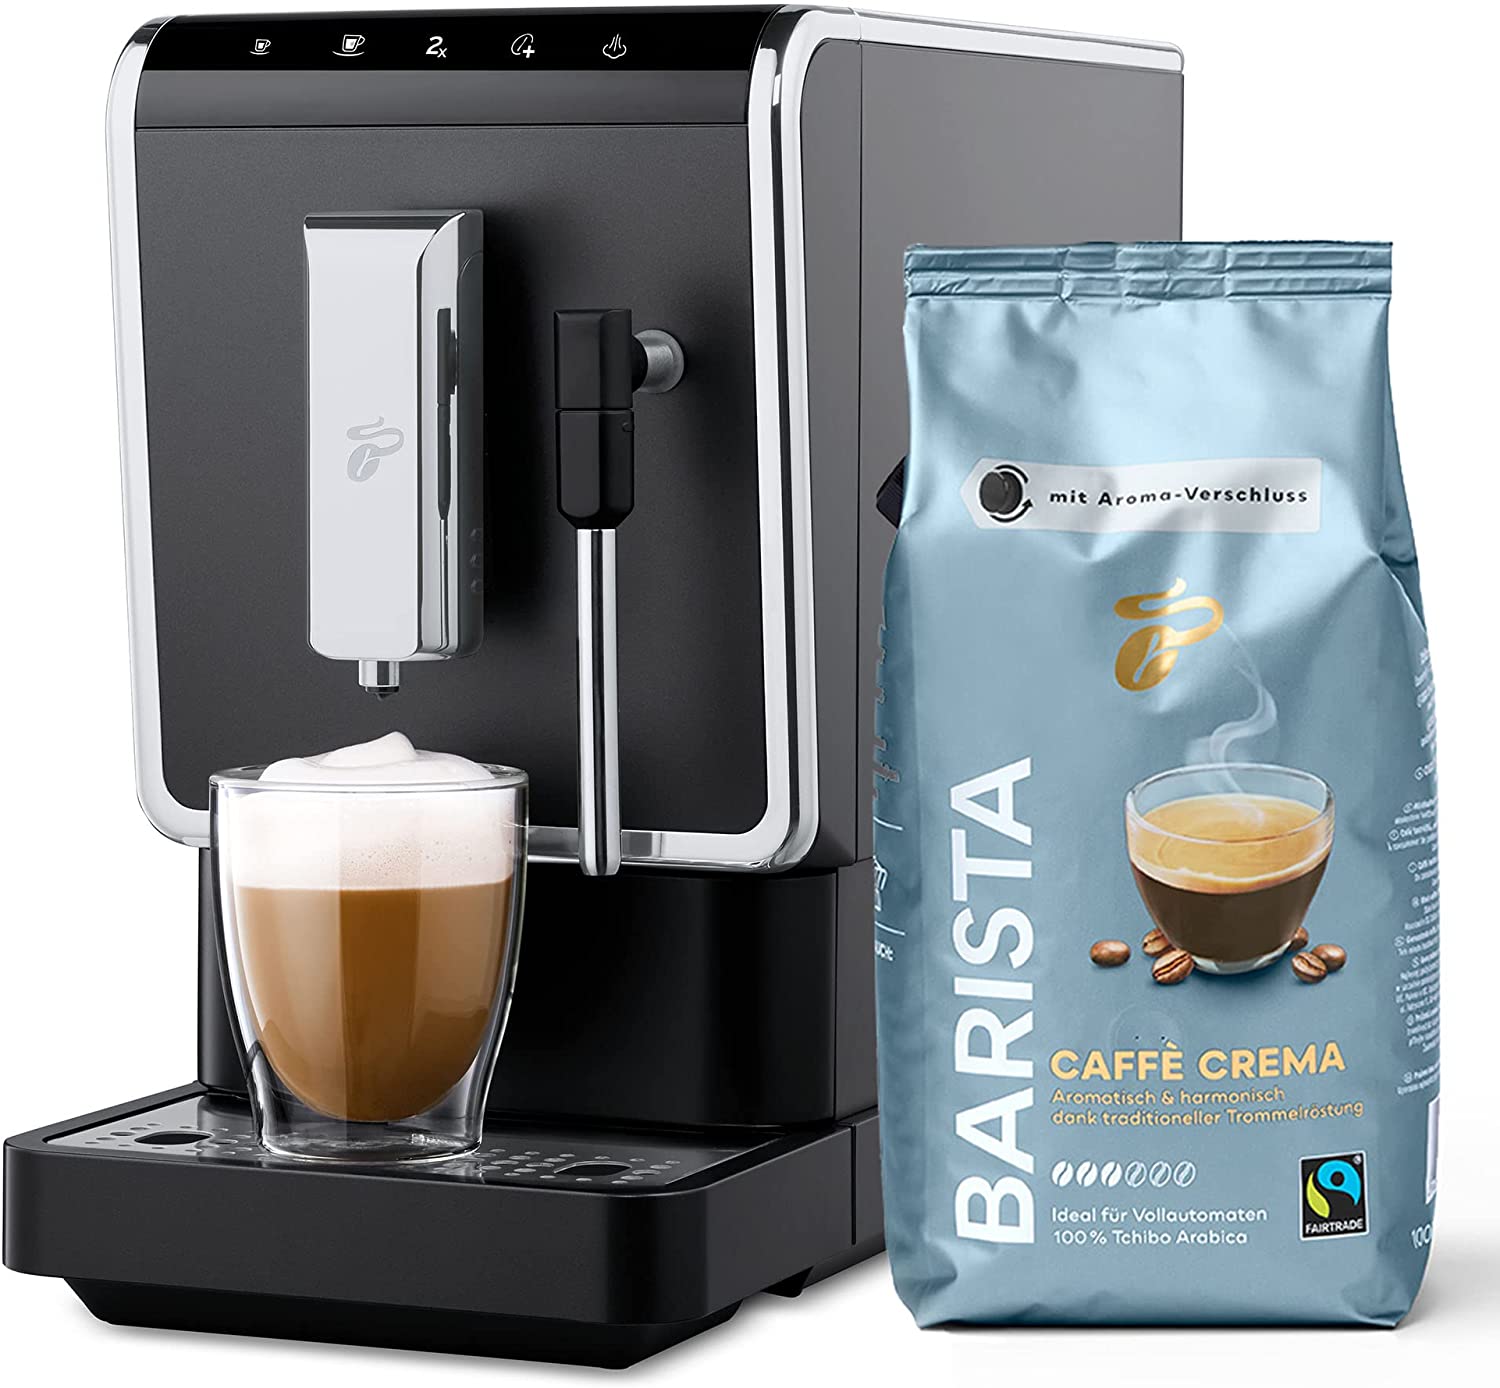 Tchibo Esperto Latte Fully Automatic Coffee Machine with Milk Frothing Function incl. 1 kg Barista Caffè Crema for Caffè Crema, Espresso and Milk Specialities, Anthracite